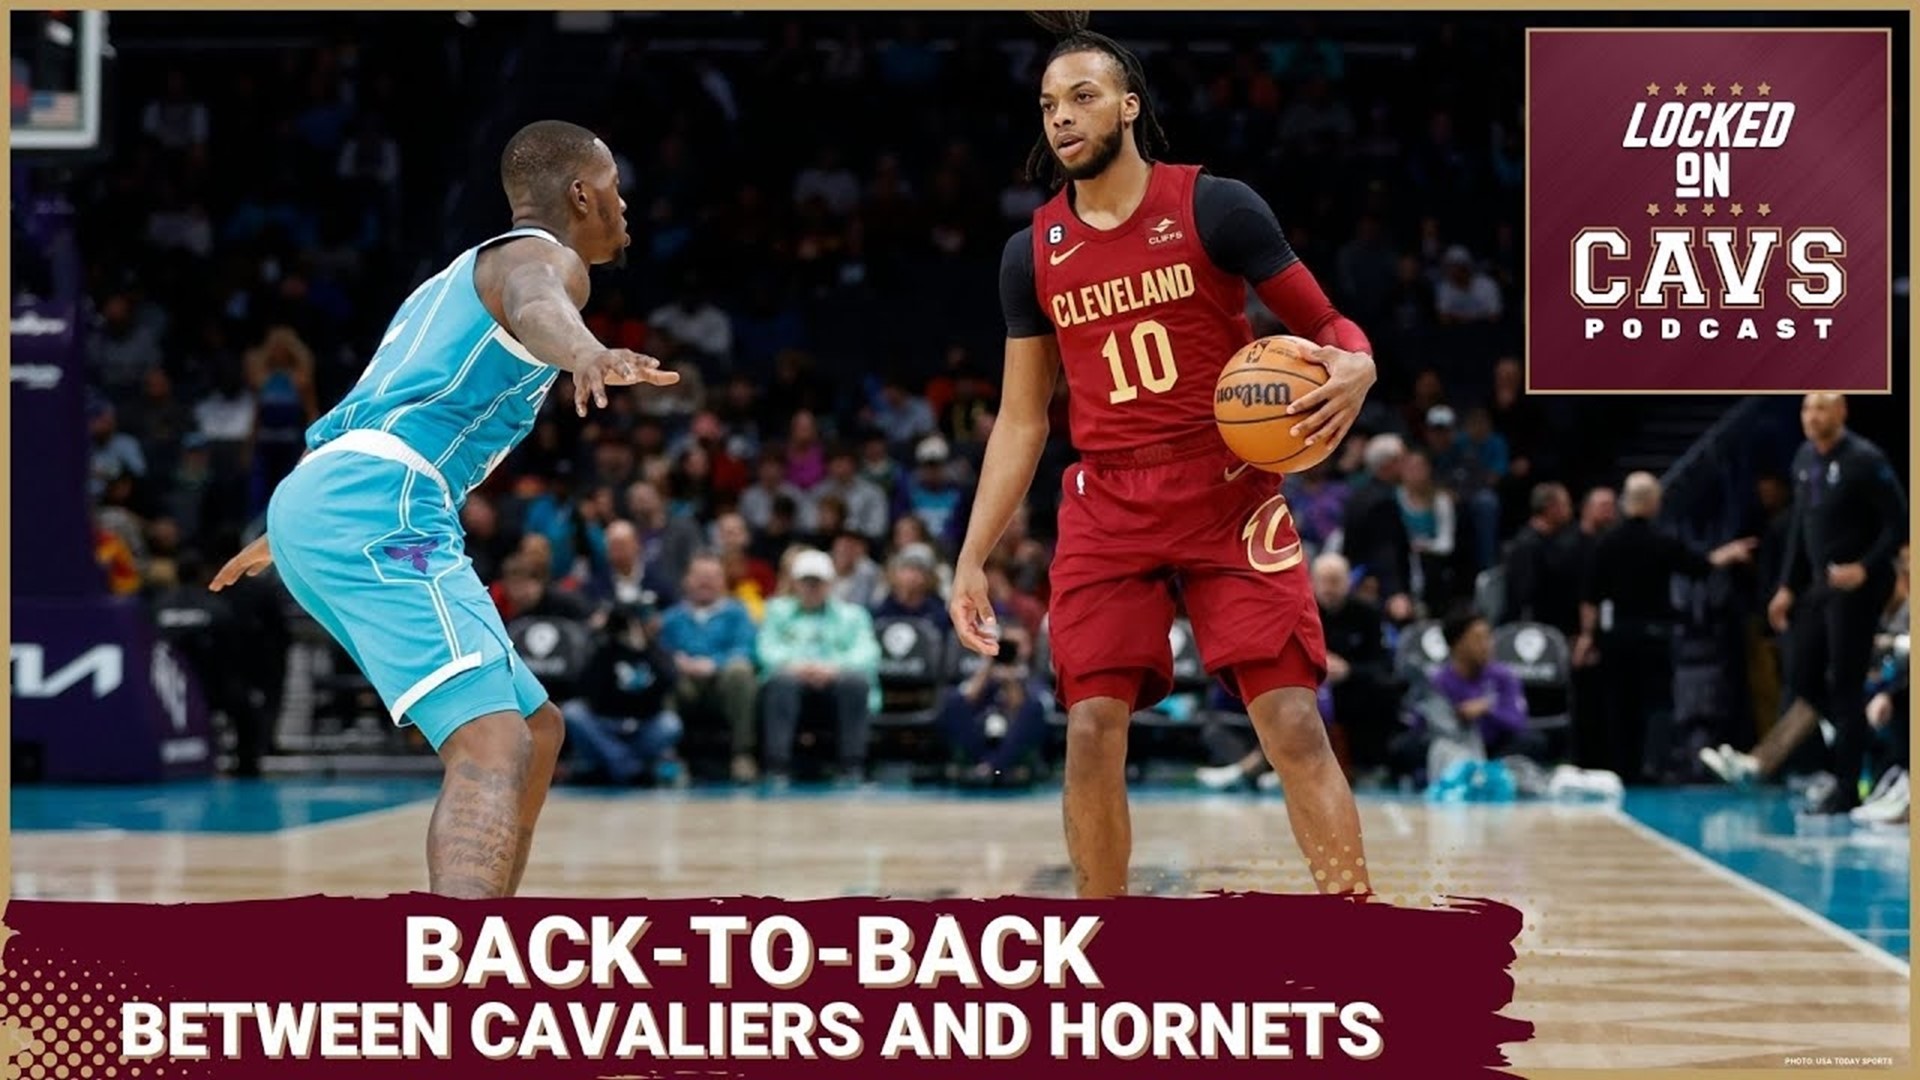 On a new episode of Locked on Cavs host Evan Dammarell is joined by The Chase Down’s Justin Rowan to talk more about Cleveland’s win over the Charlotte Hornets.